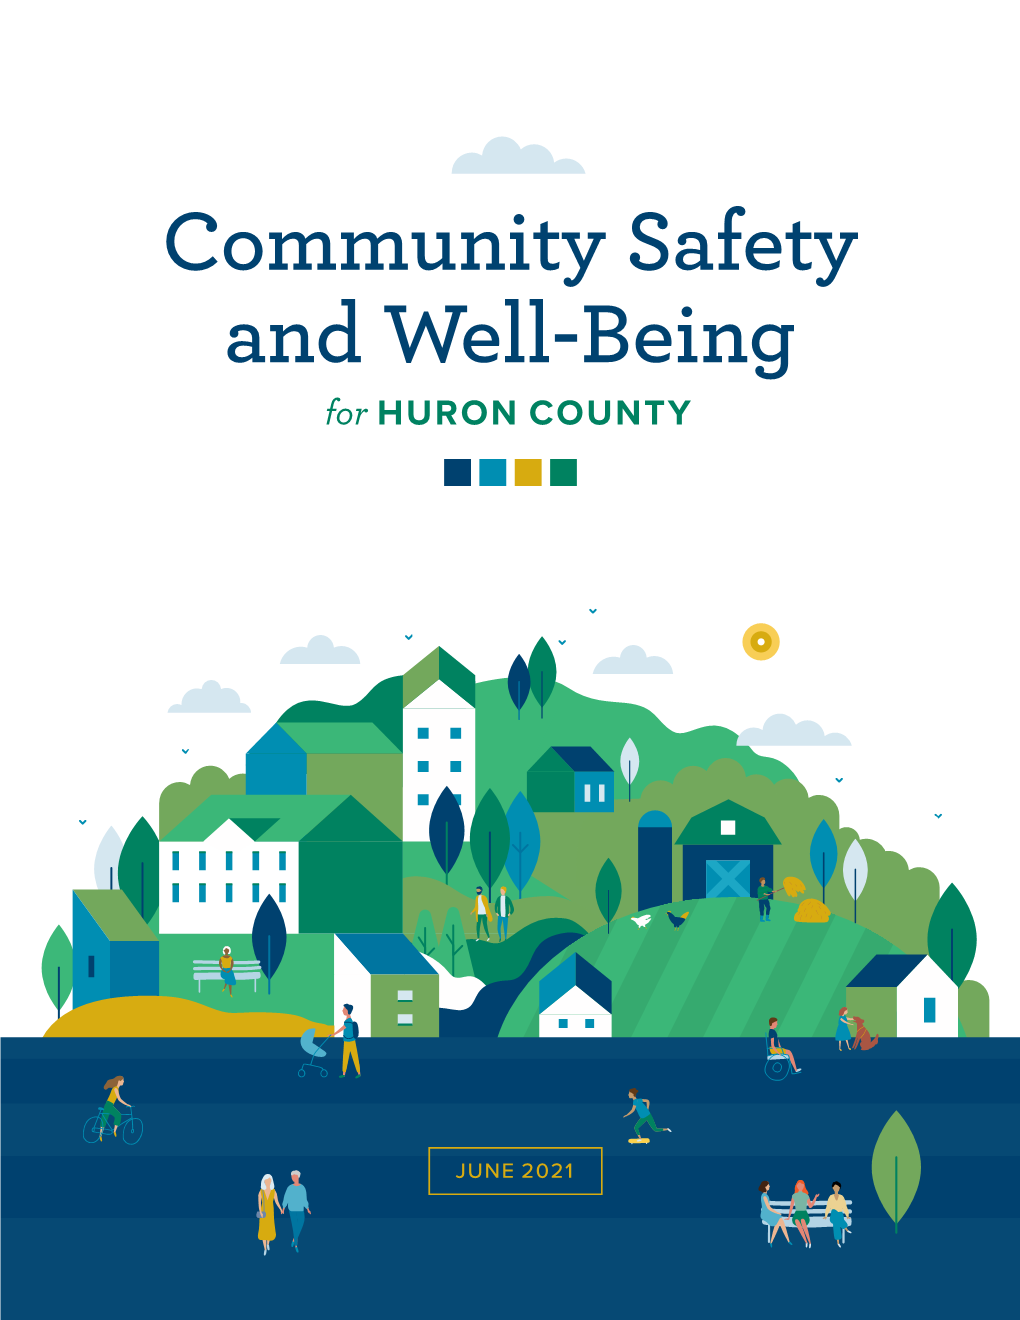 Huron County Community Safety and Well-Being Plan